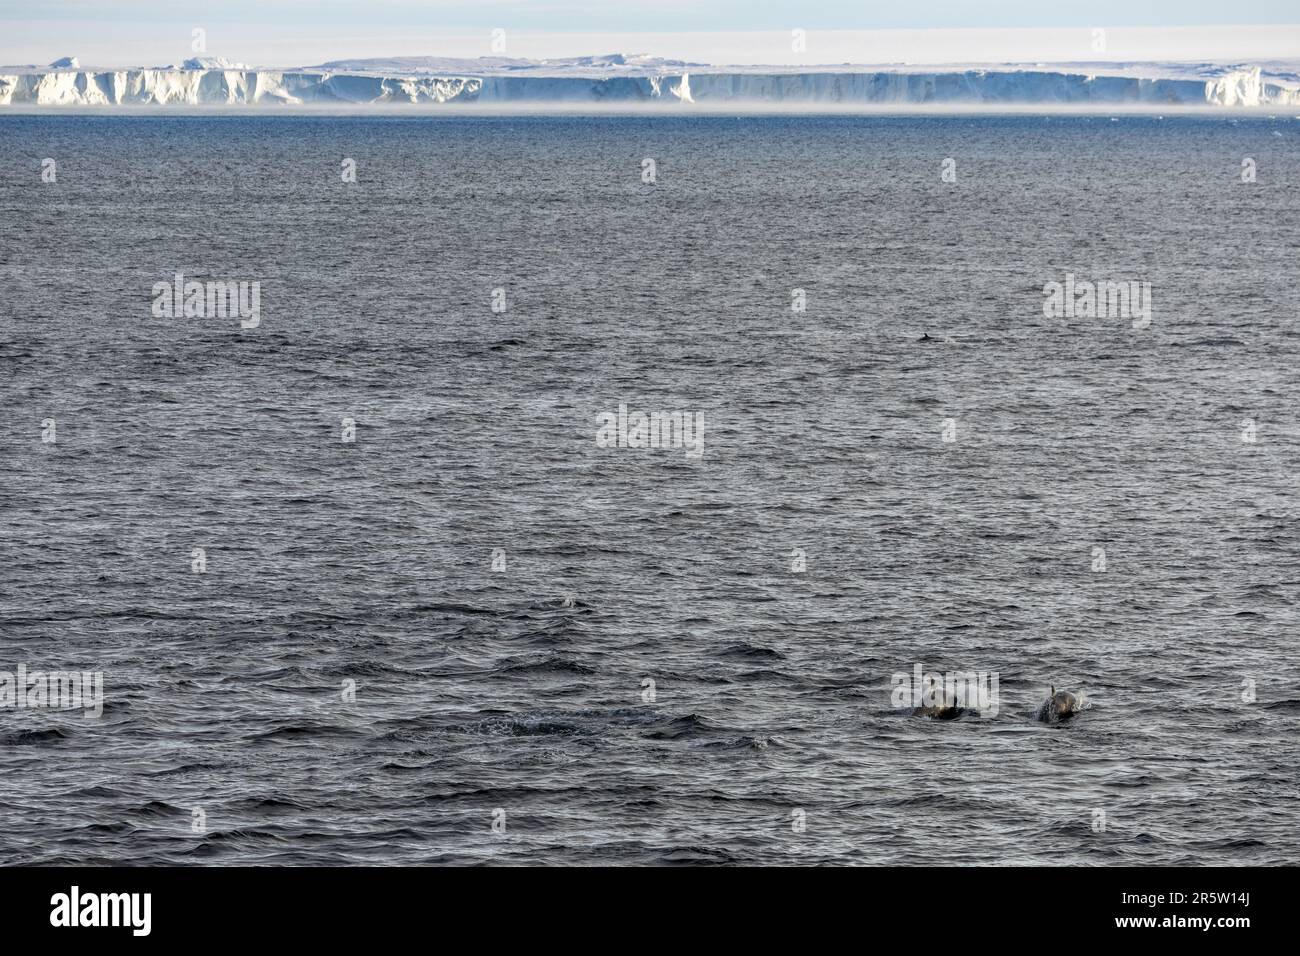 Orcas Nuoto vicino Ross Ice Shelf in Shackleton's Bay of Whales, Mare di Ross, Oceano Meridionale, Antartide Foto Stock